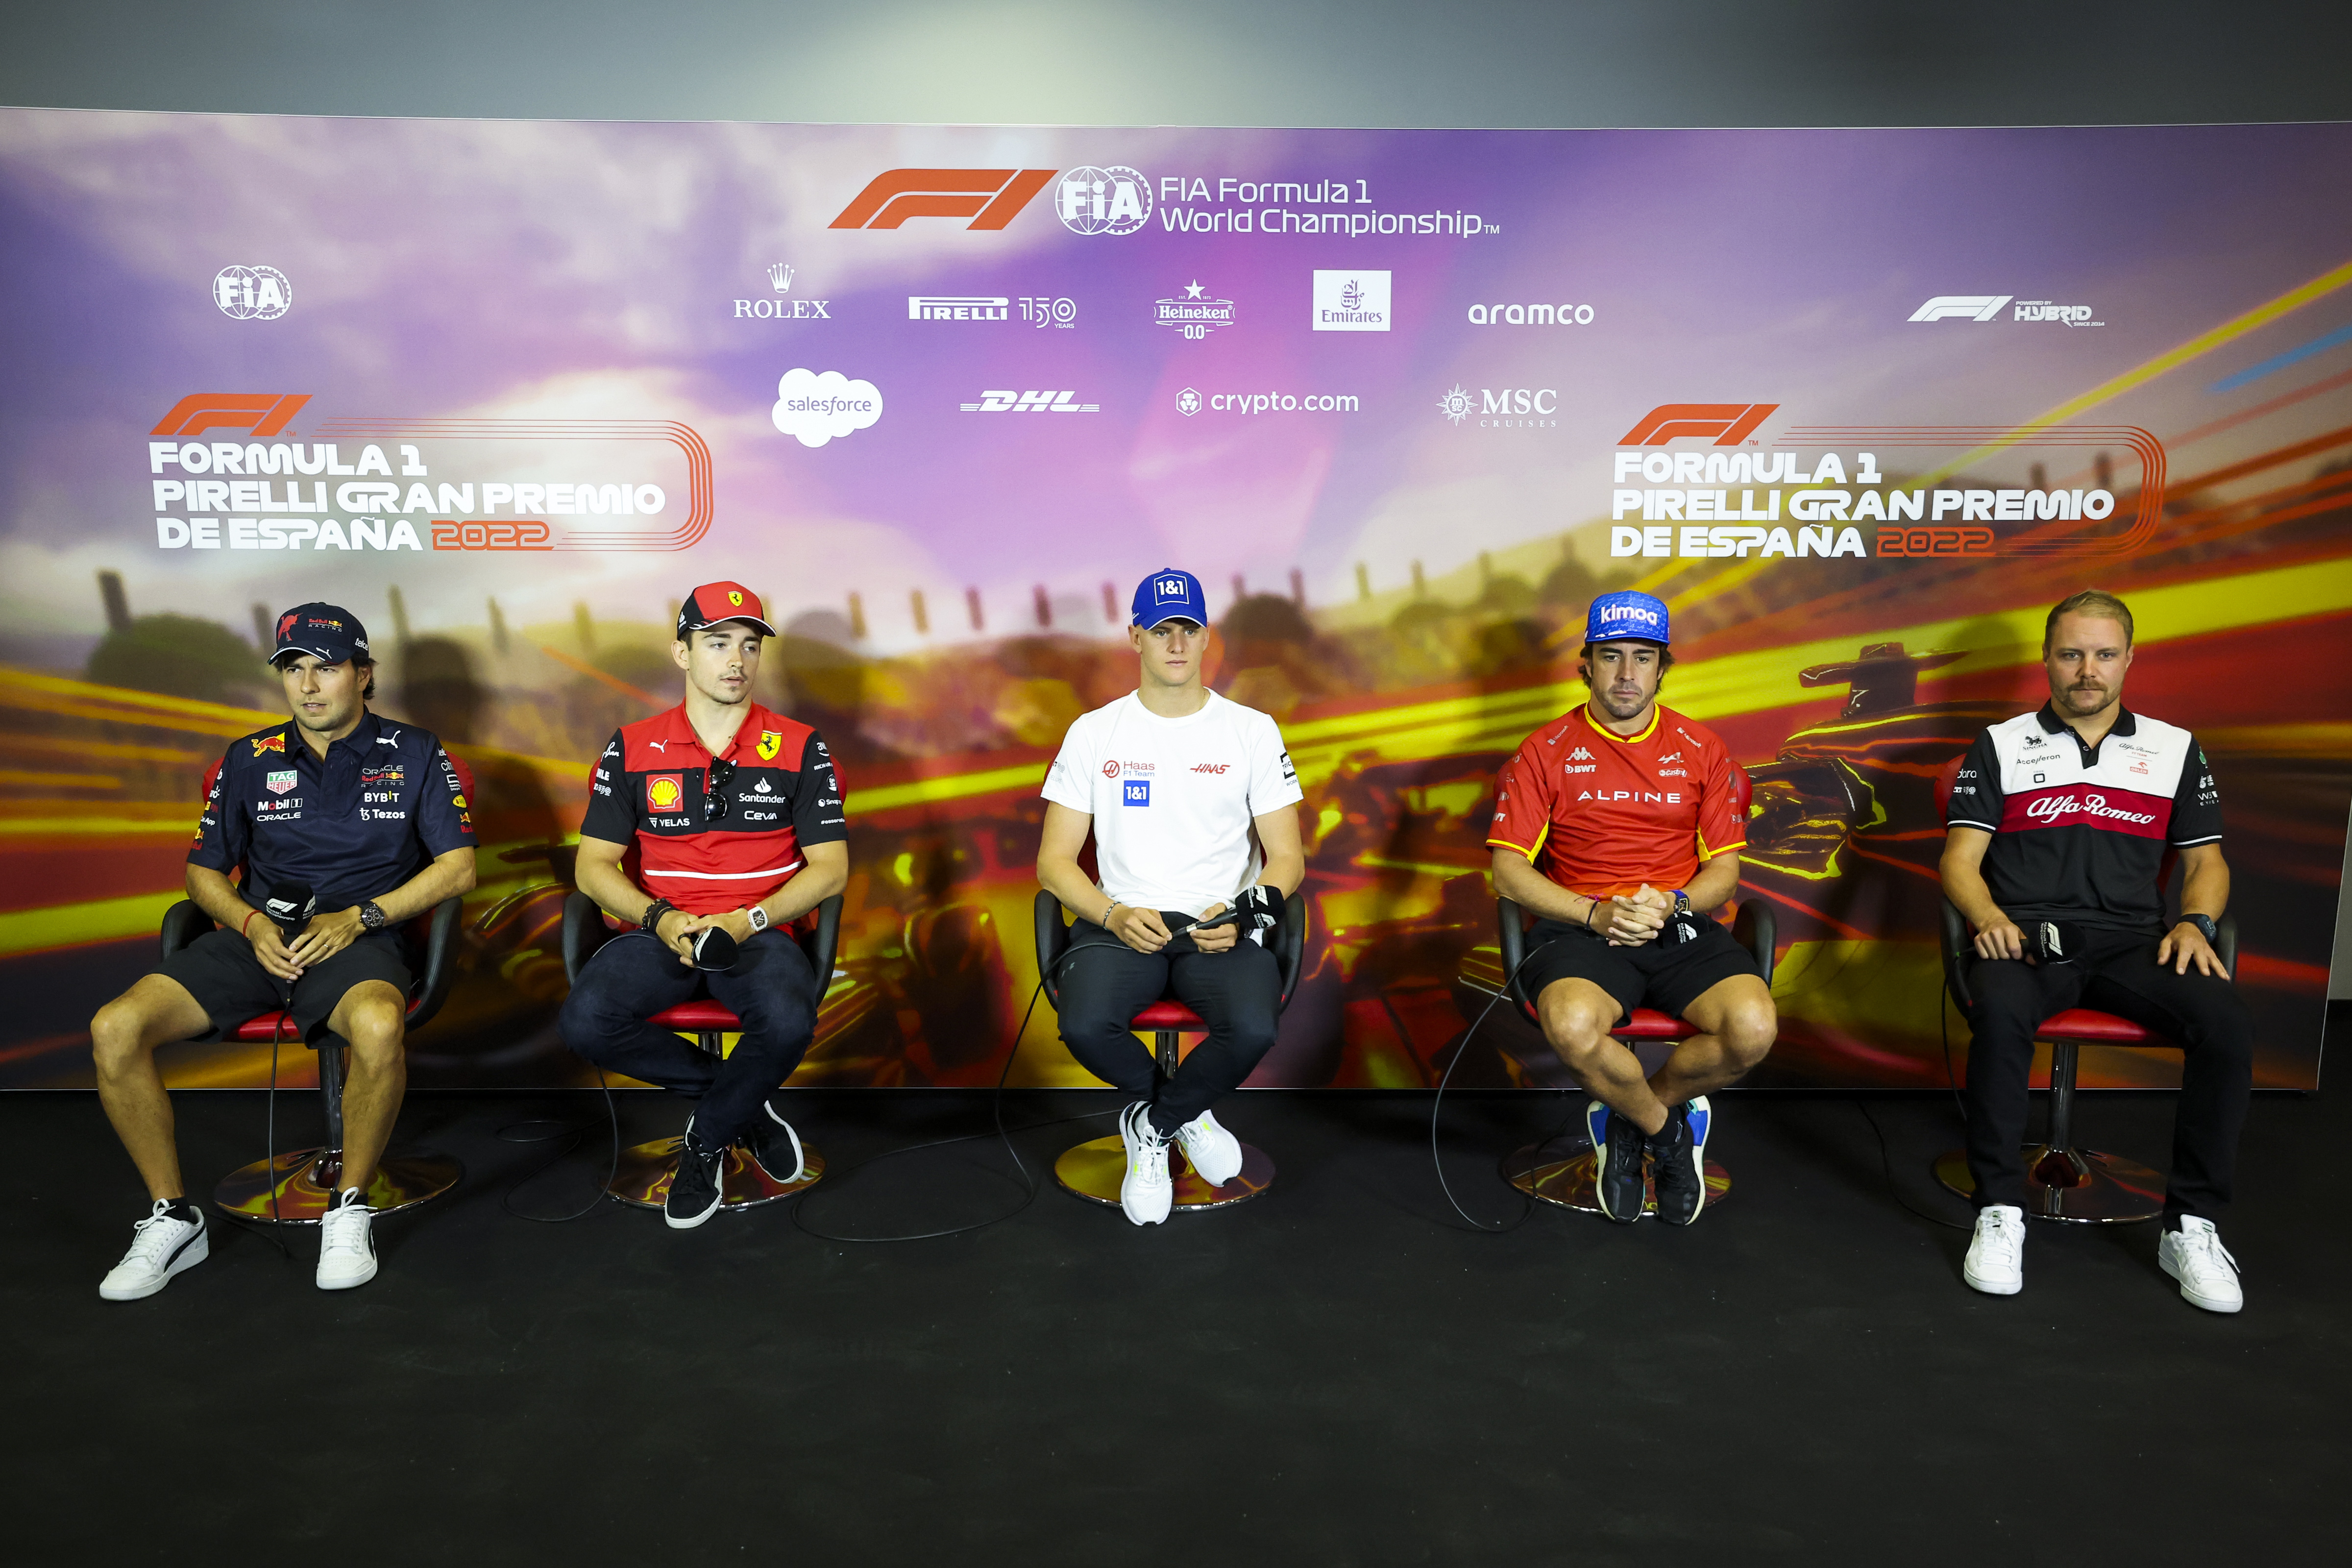 Video: Onboard lap simulation of F1 track for 2022 Miami GP · RaceFans